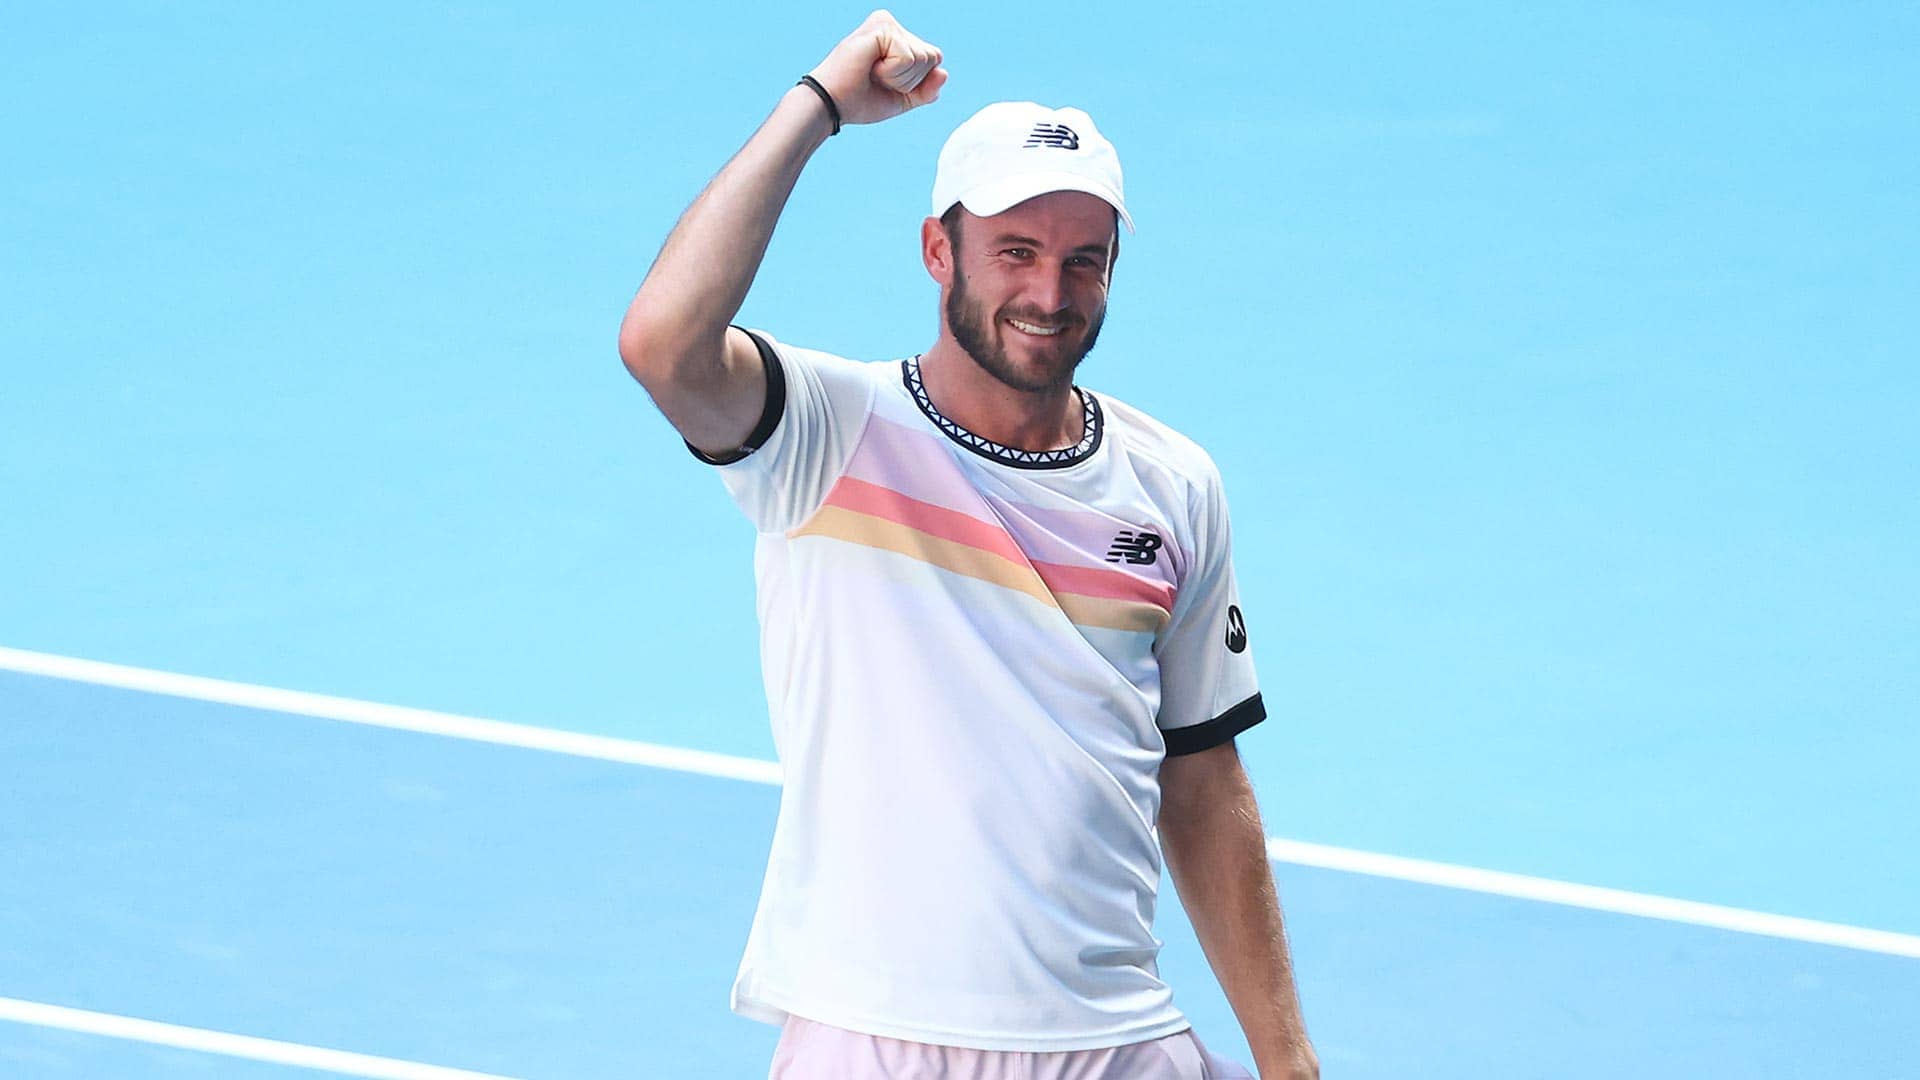 Tommy Paul reached the semi-finals at the Australian Open last year.